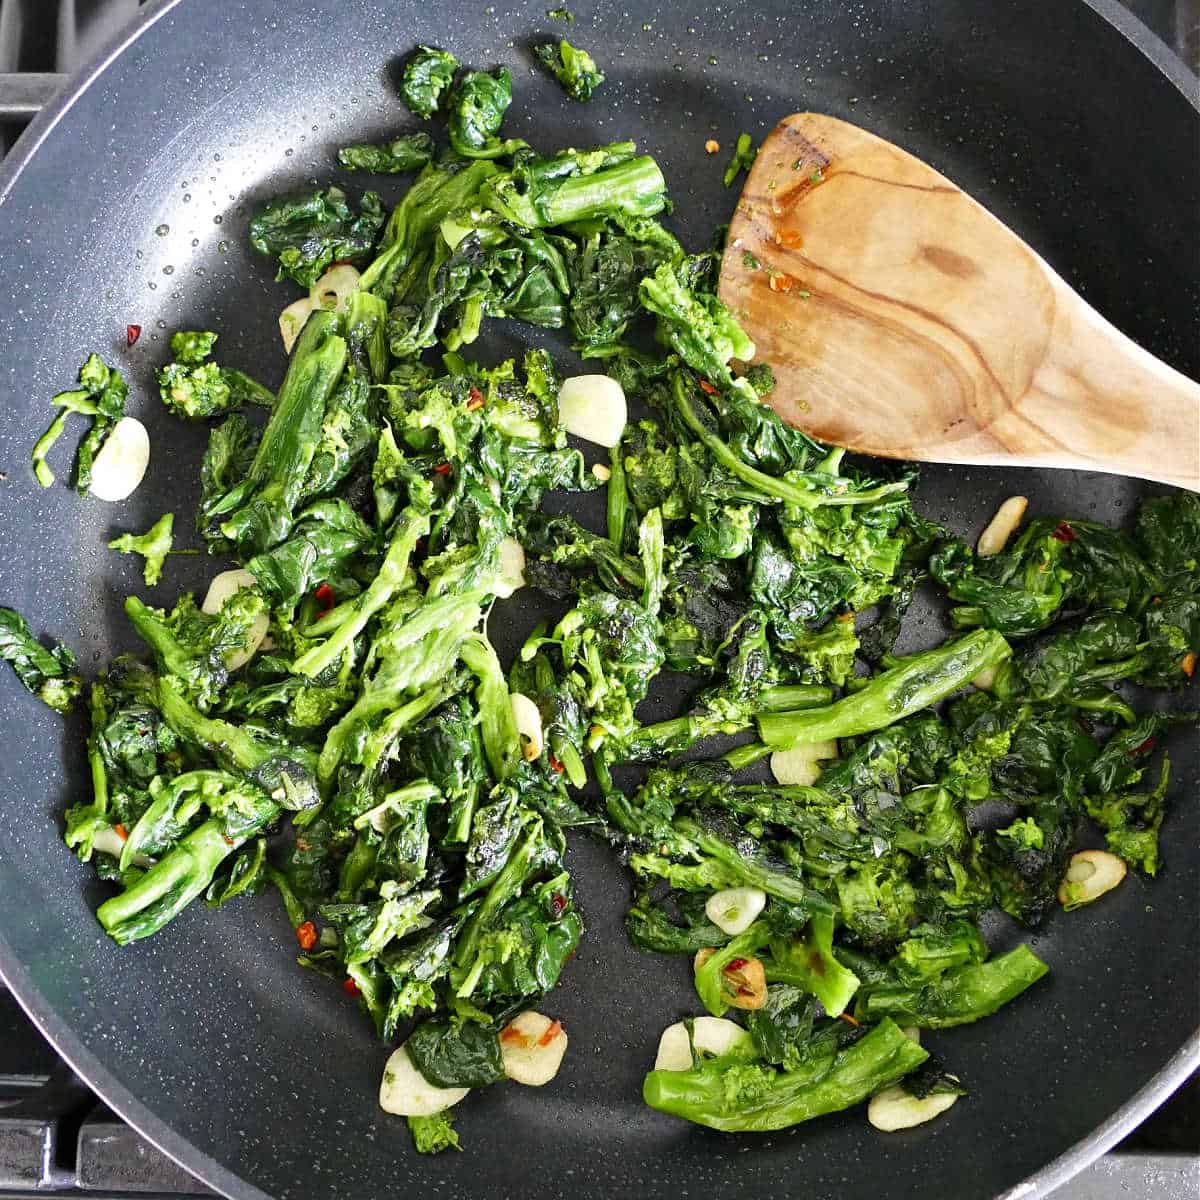 blanched rapini cooking in olive oil with garlic and red pepper flakes in a skillet